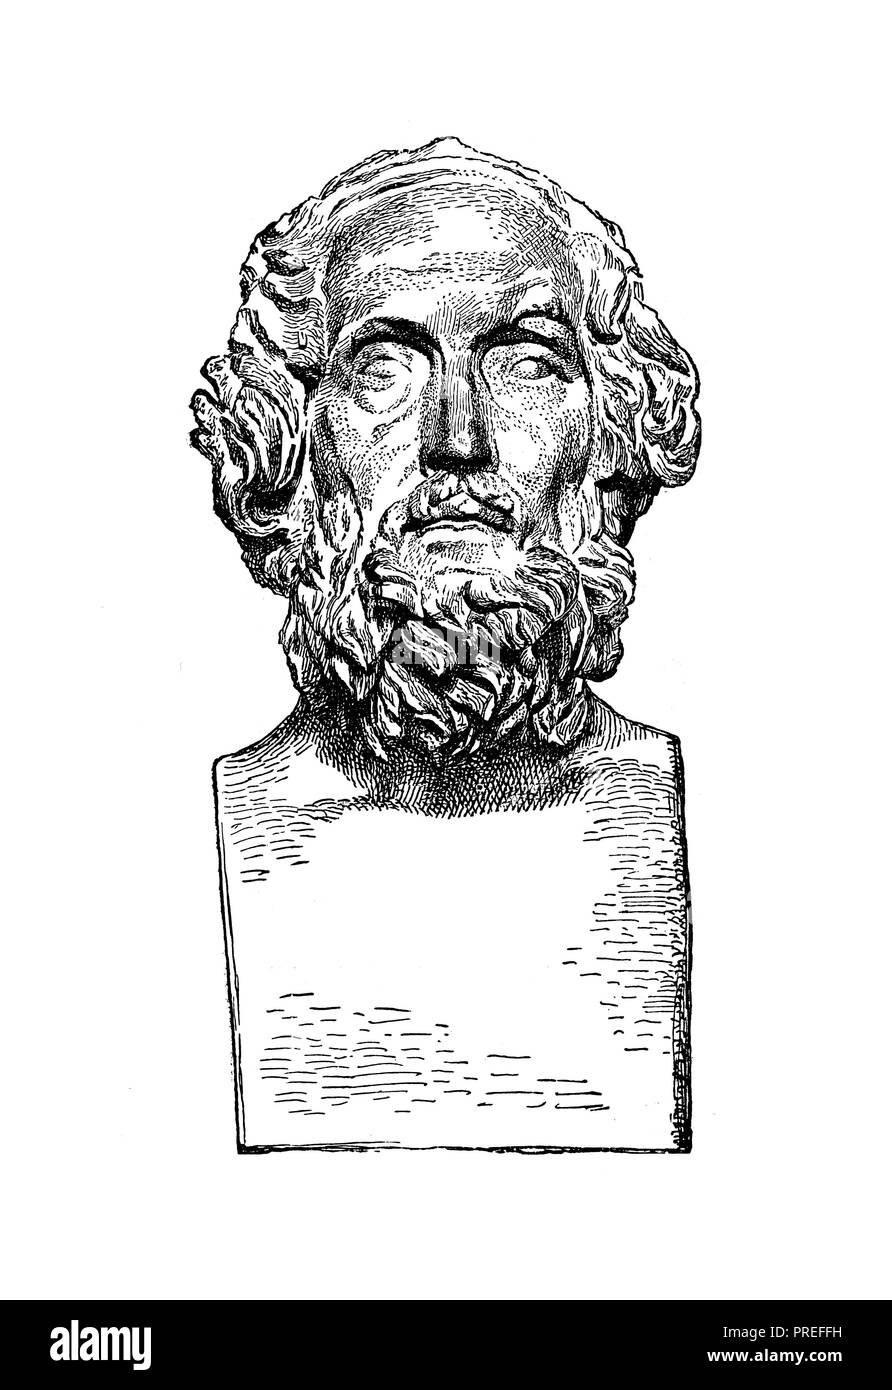 Original artwork of Homer, the author of the Iliad and the Odyssey. Published in A pictorial history of the world's great nations: from the earliest d Stock Photo